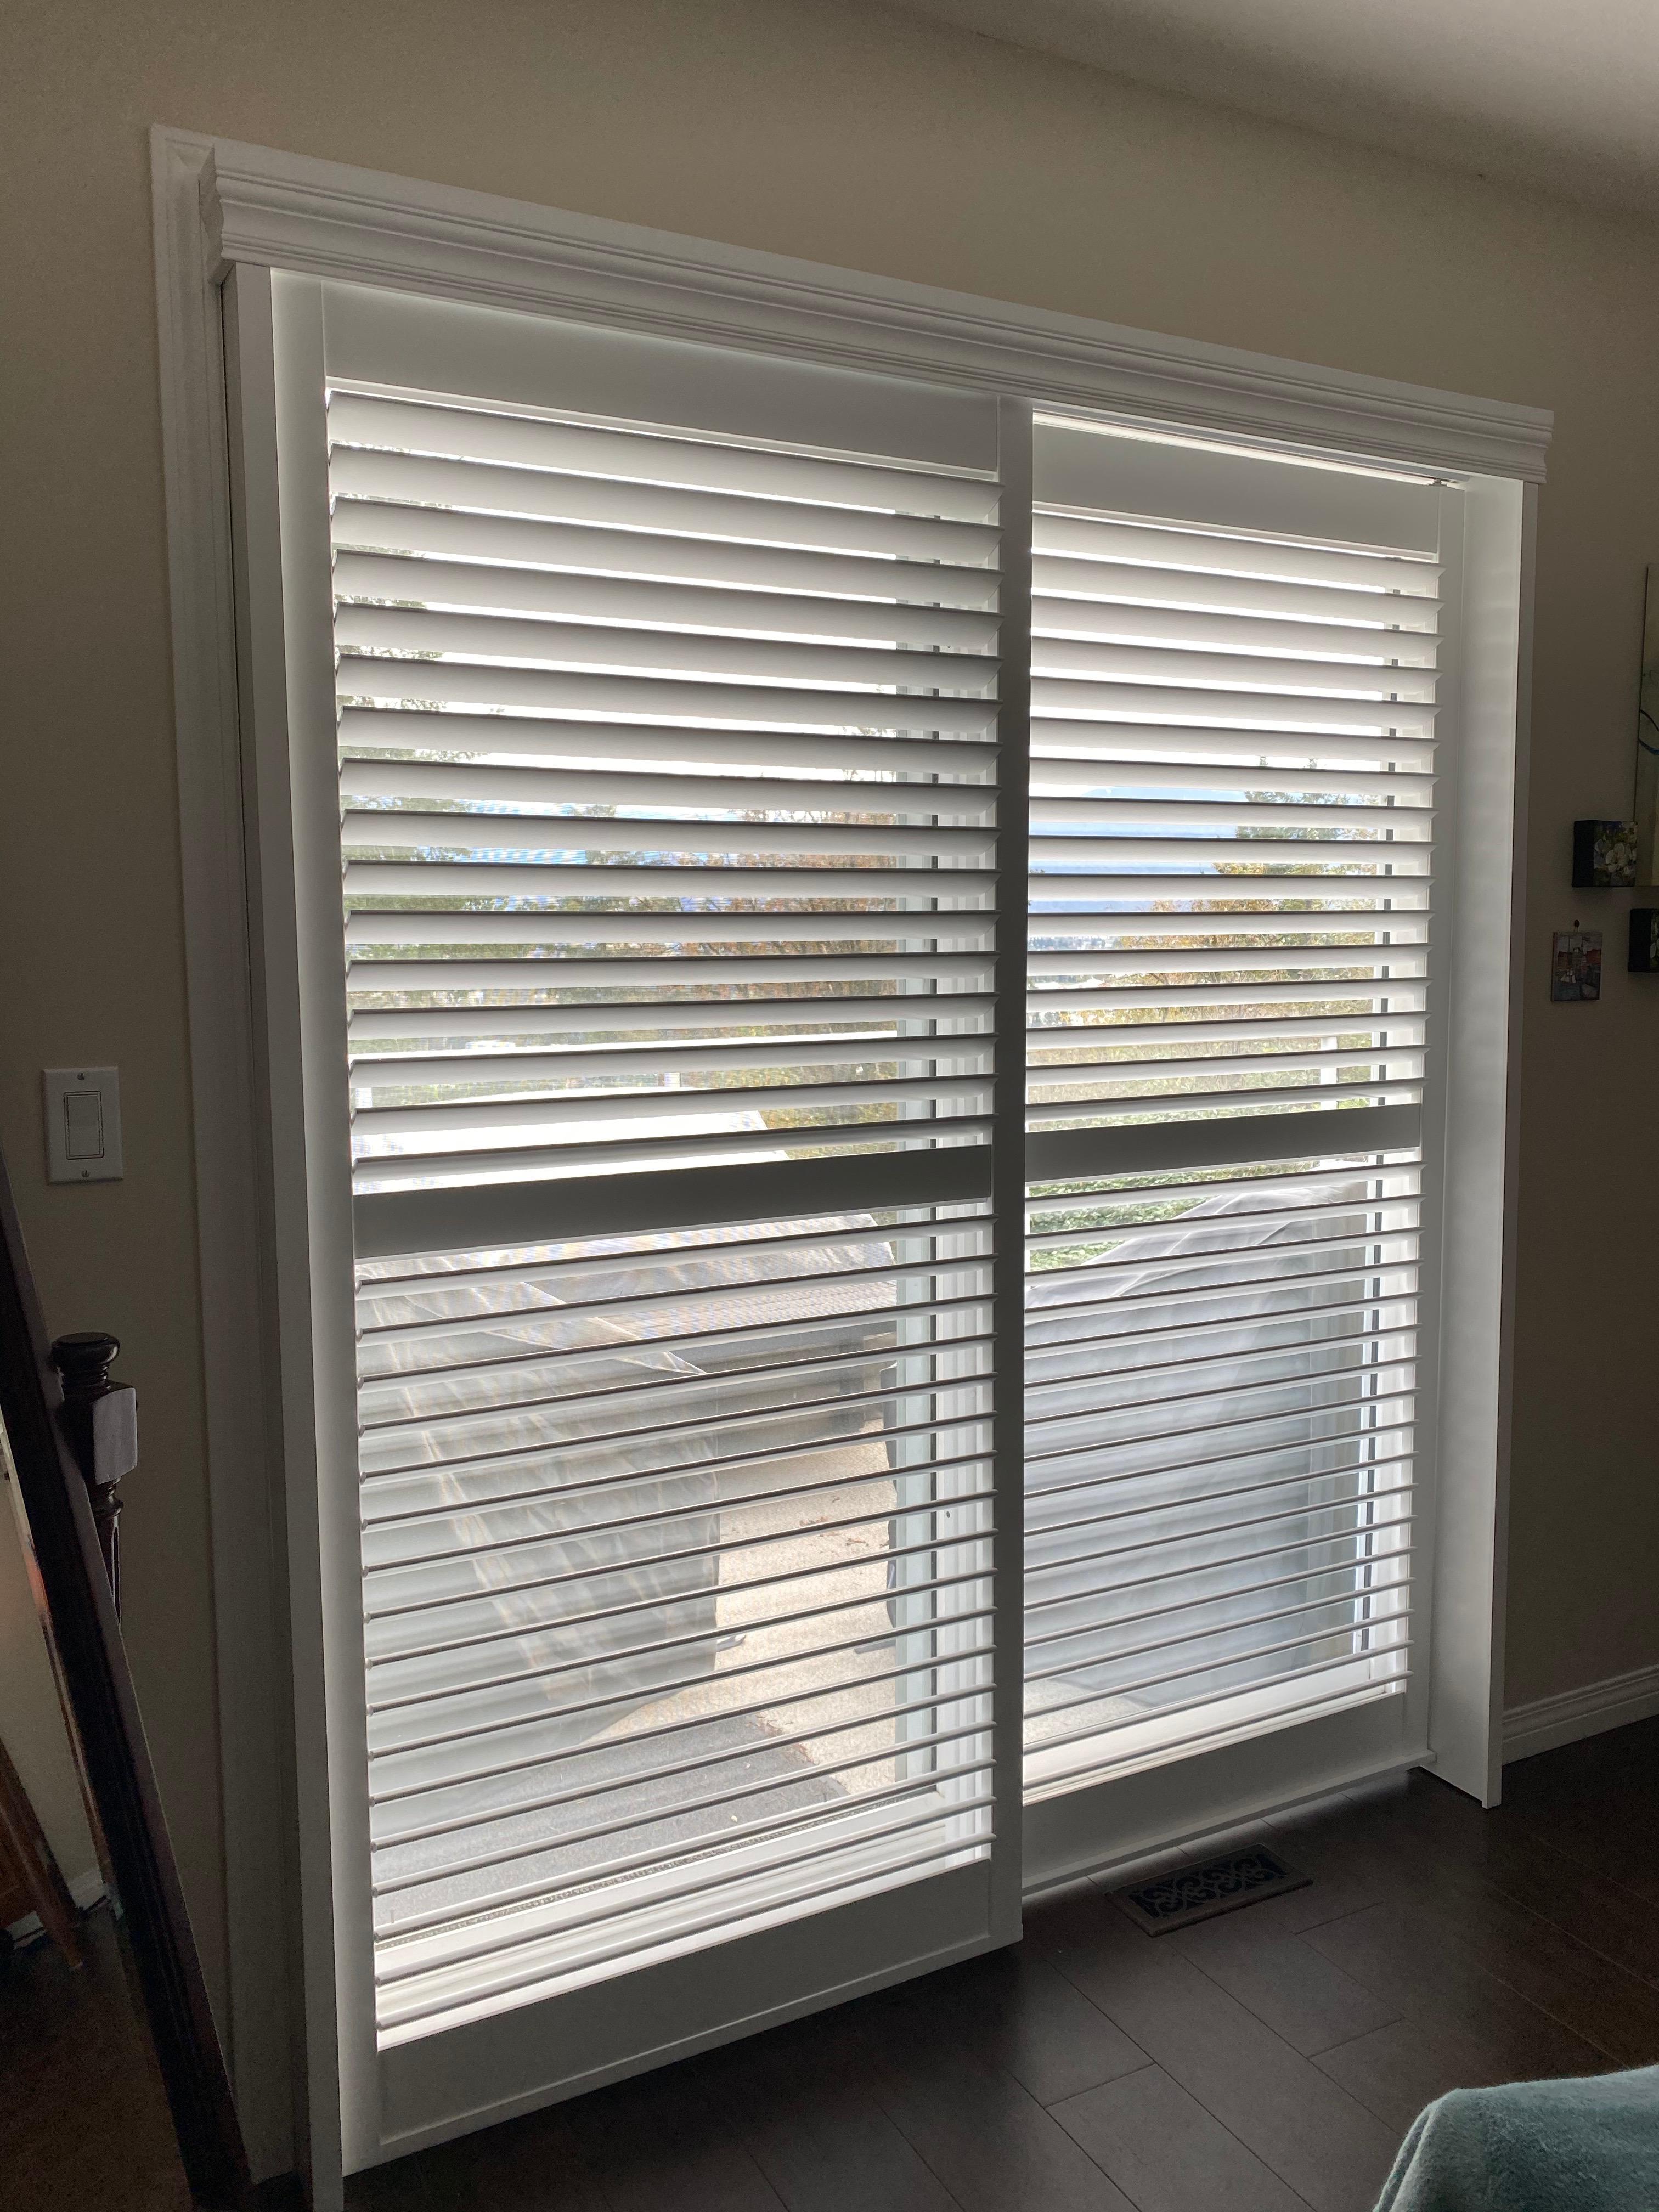 Budget Blinds of Chilliwack, Hope and Harrison Chilliwack (604)824-0375